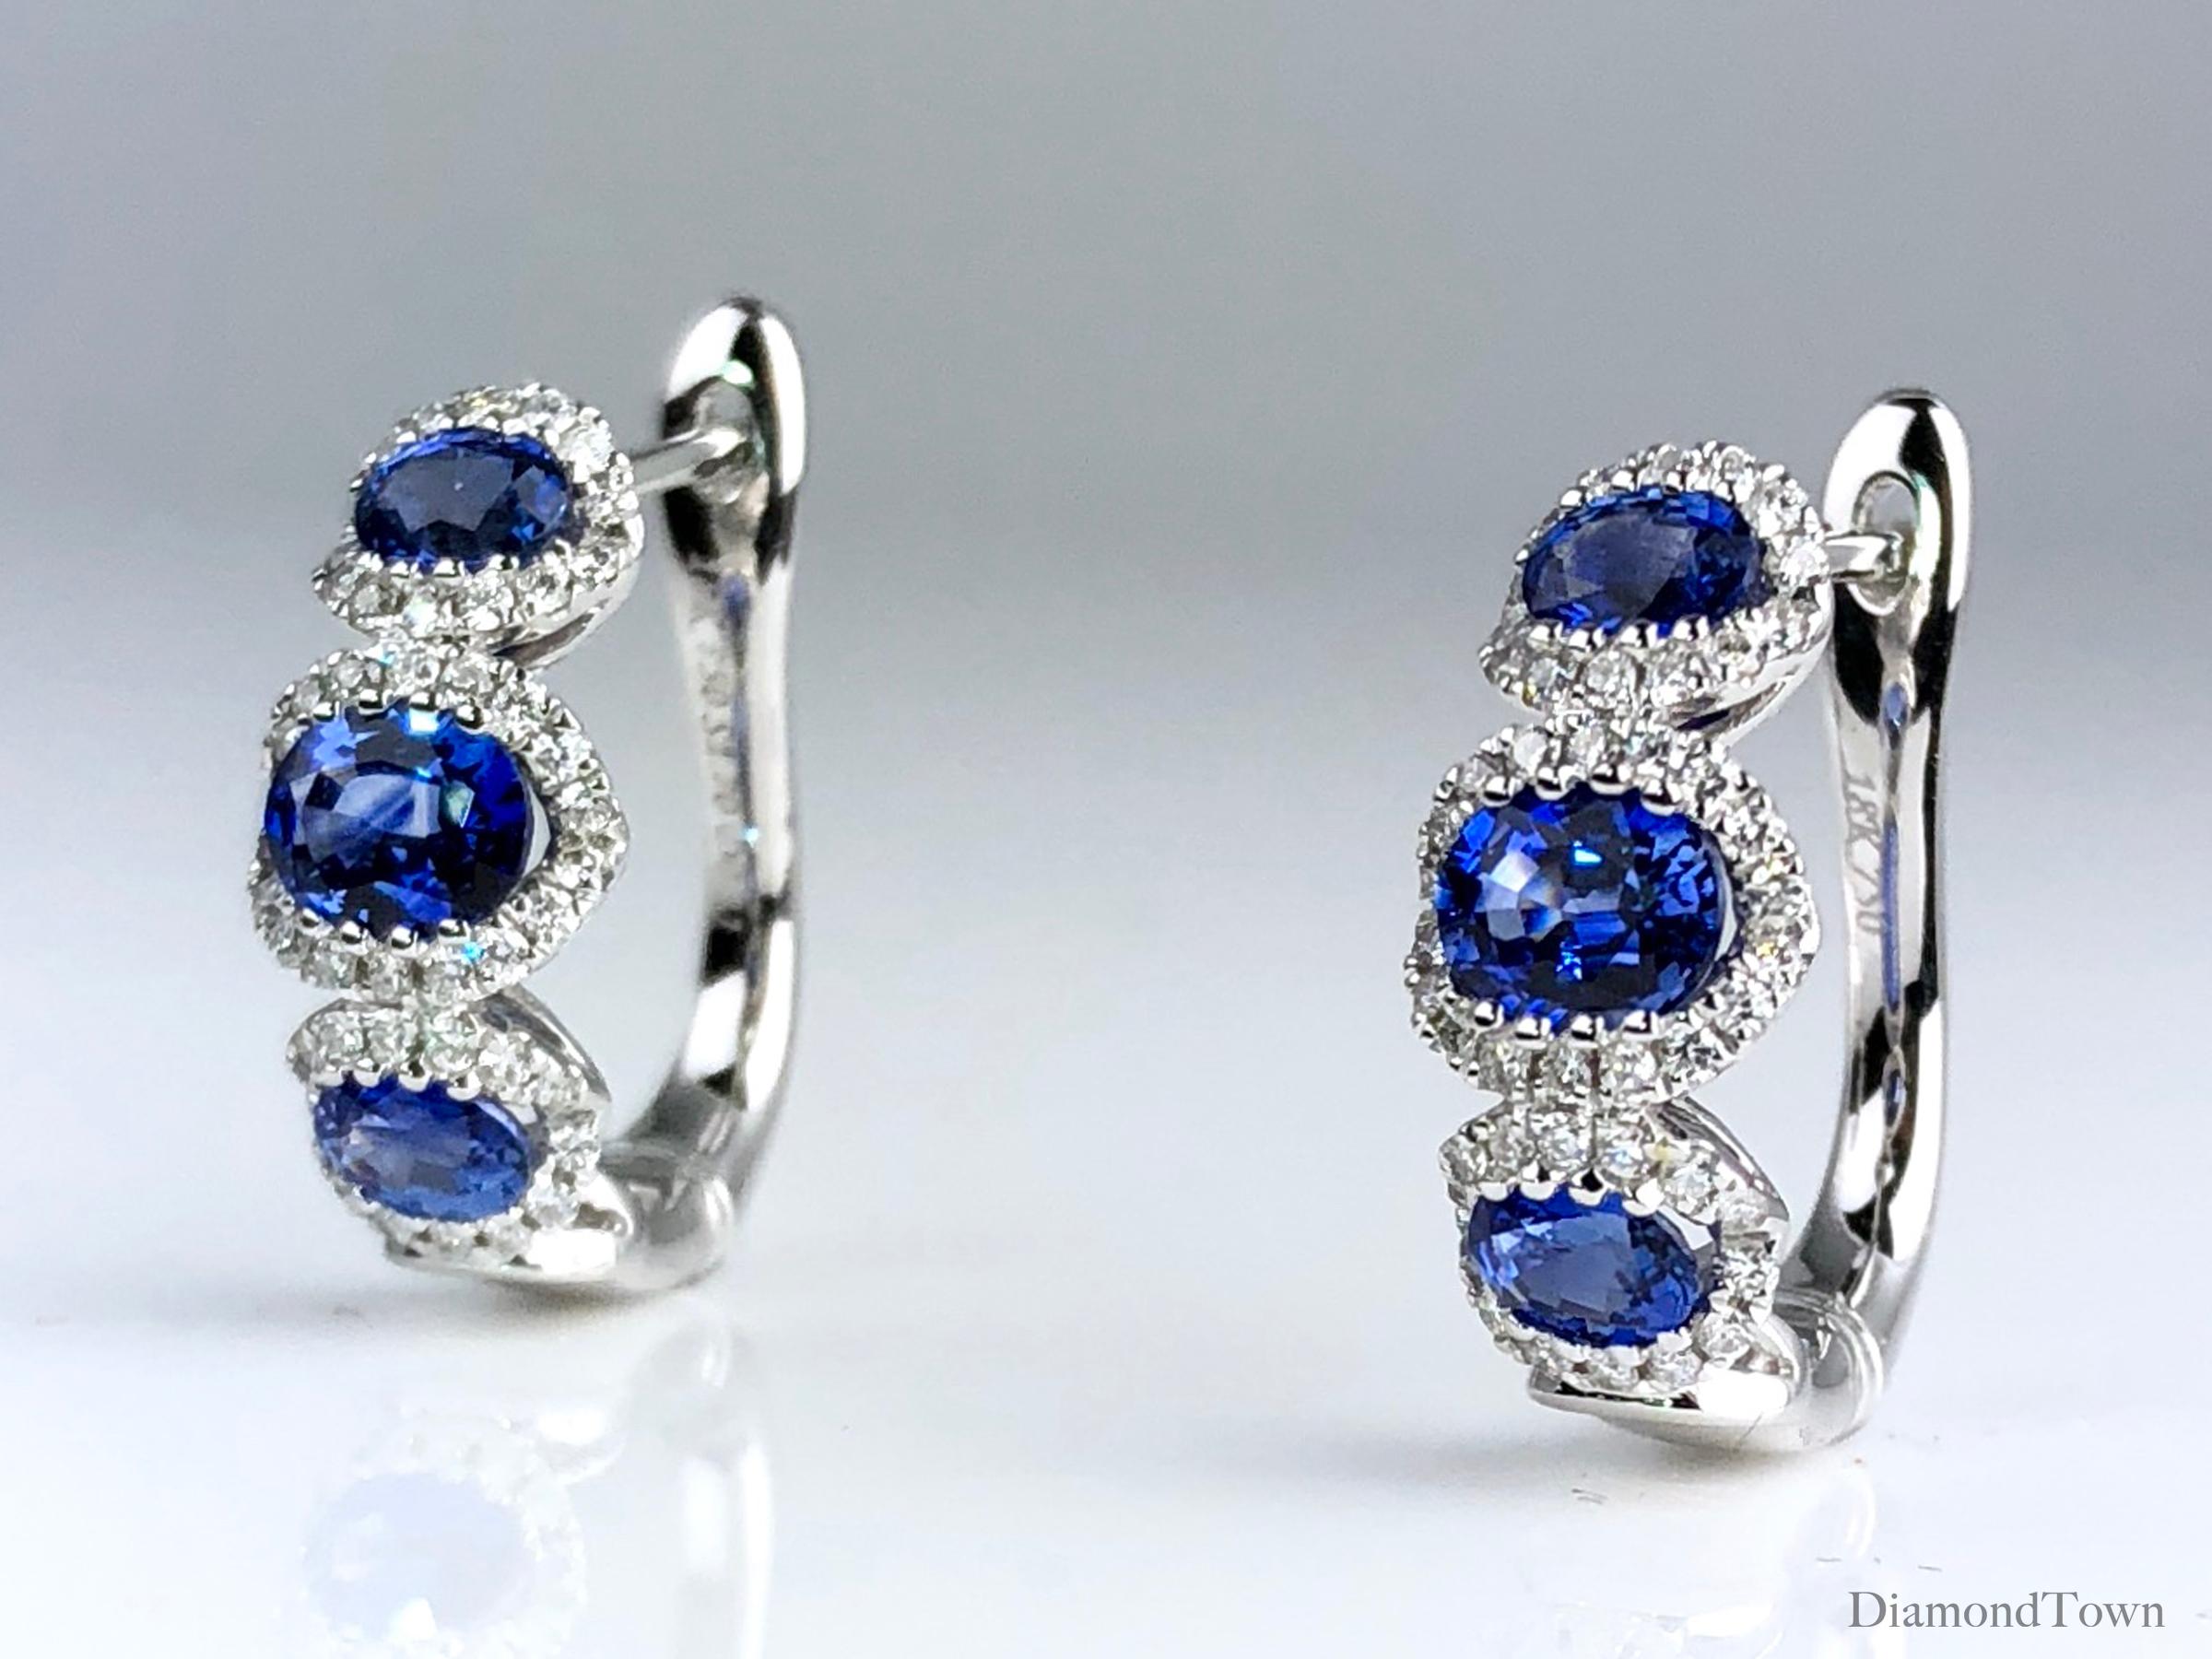 (DiamondTown) These gorgeous Diamond Town earrings feature three vivid blue oval cut sapphires (1.70 carats total), each inside a halo of round white diamonds (0.31 carats total). The earrings close securely by lever-back and are set in 18k White